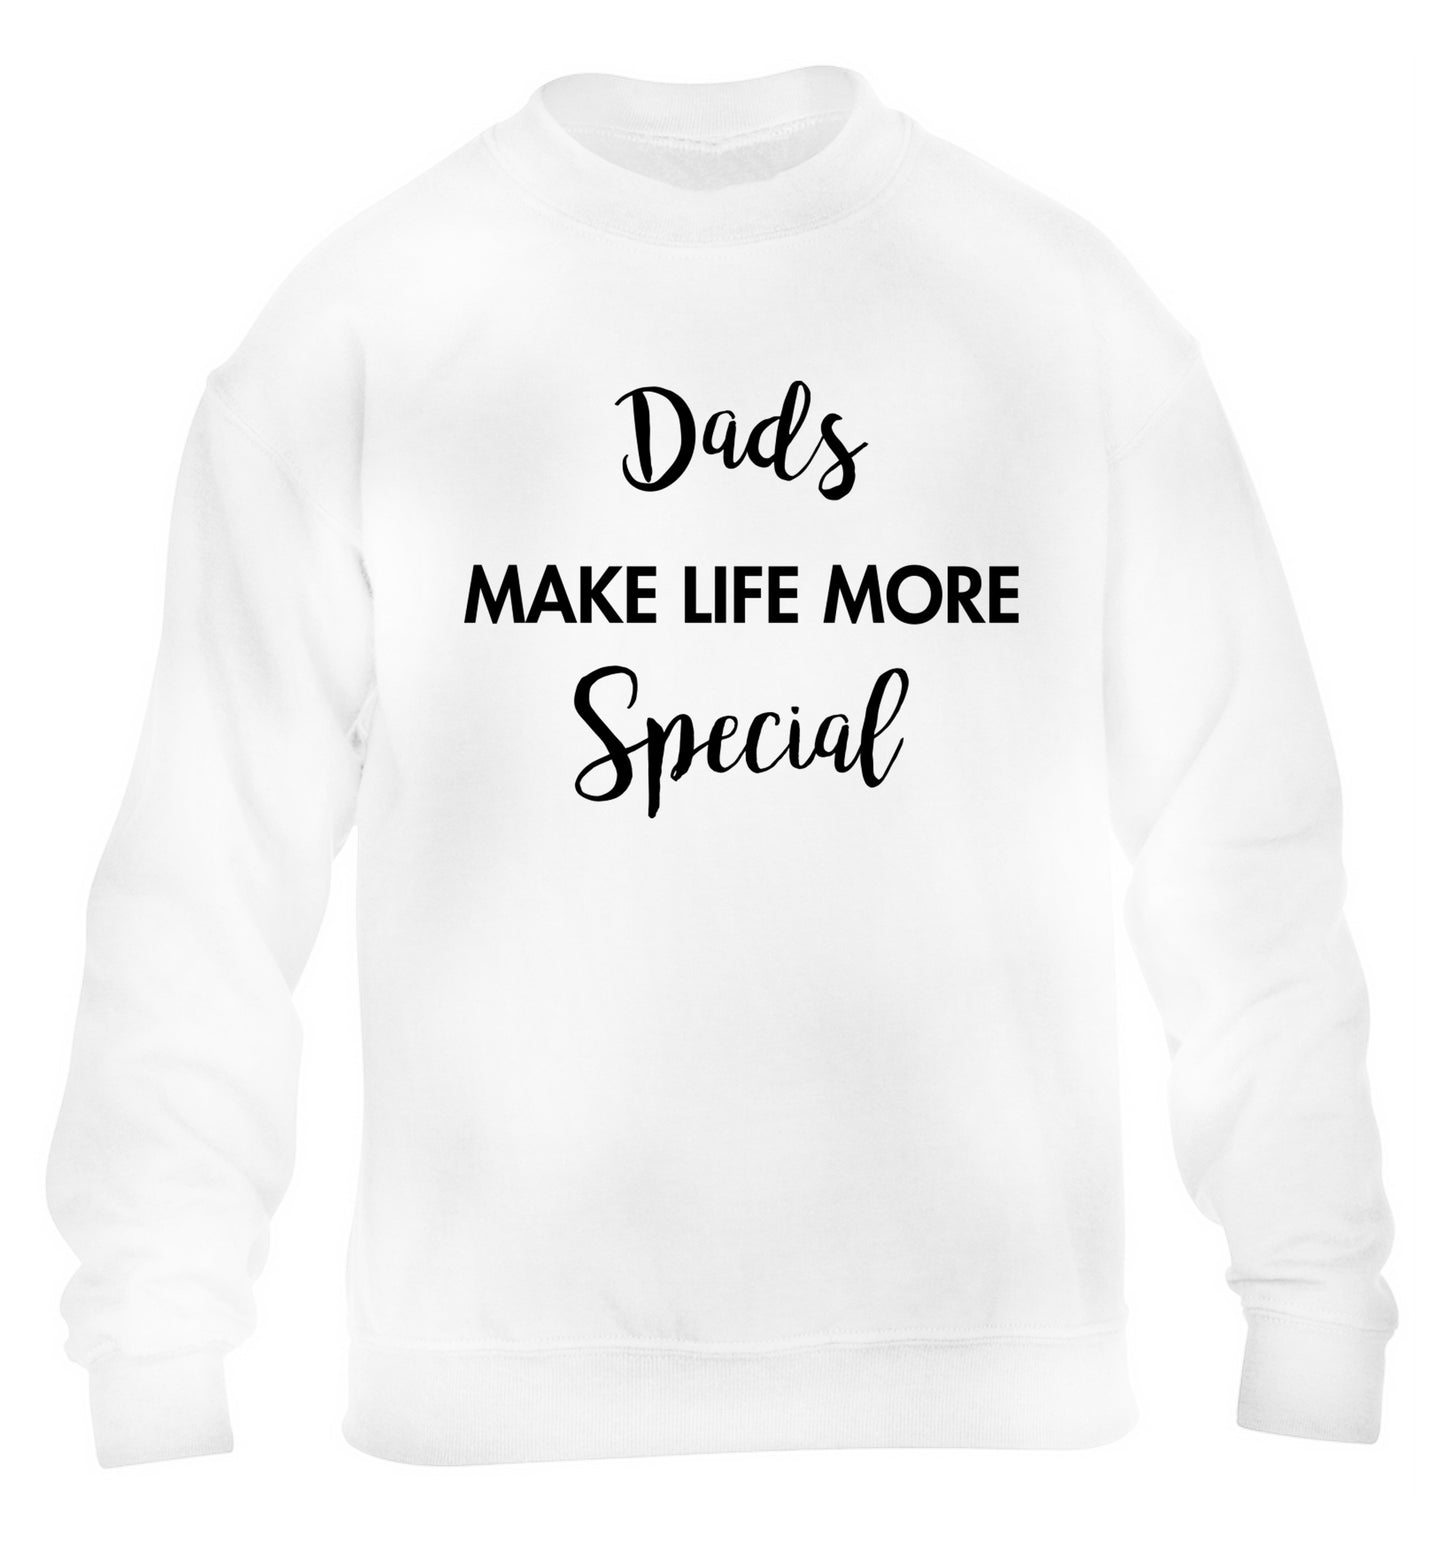 Dads make life more special children's white sweater 12-14 Years